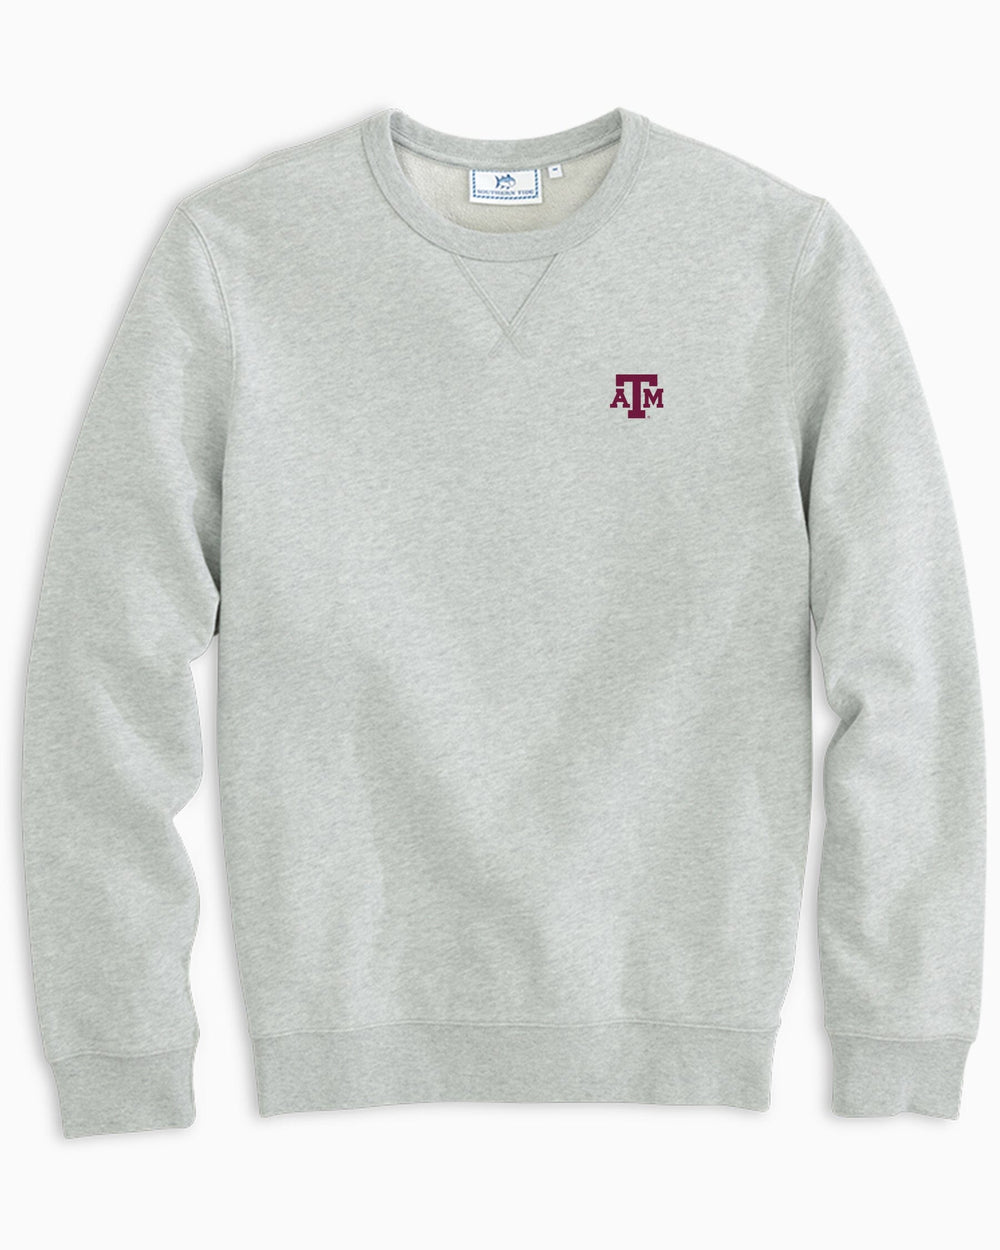 The front view of the Texas A&M Aggies Upper Deck Pullover Sweatshirt by Southern Tide - Heather Slate Grey